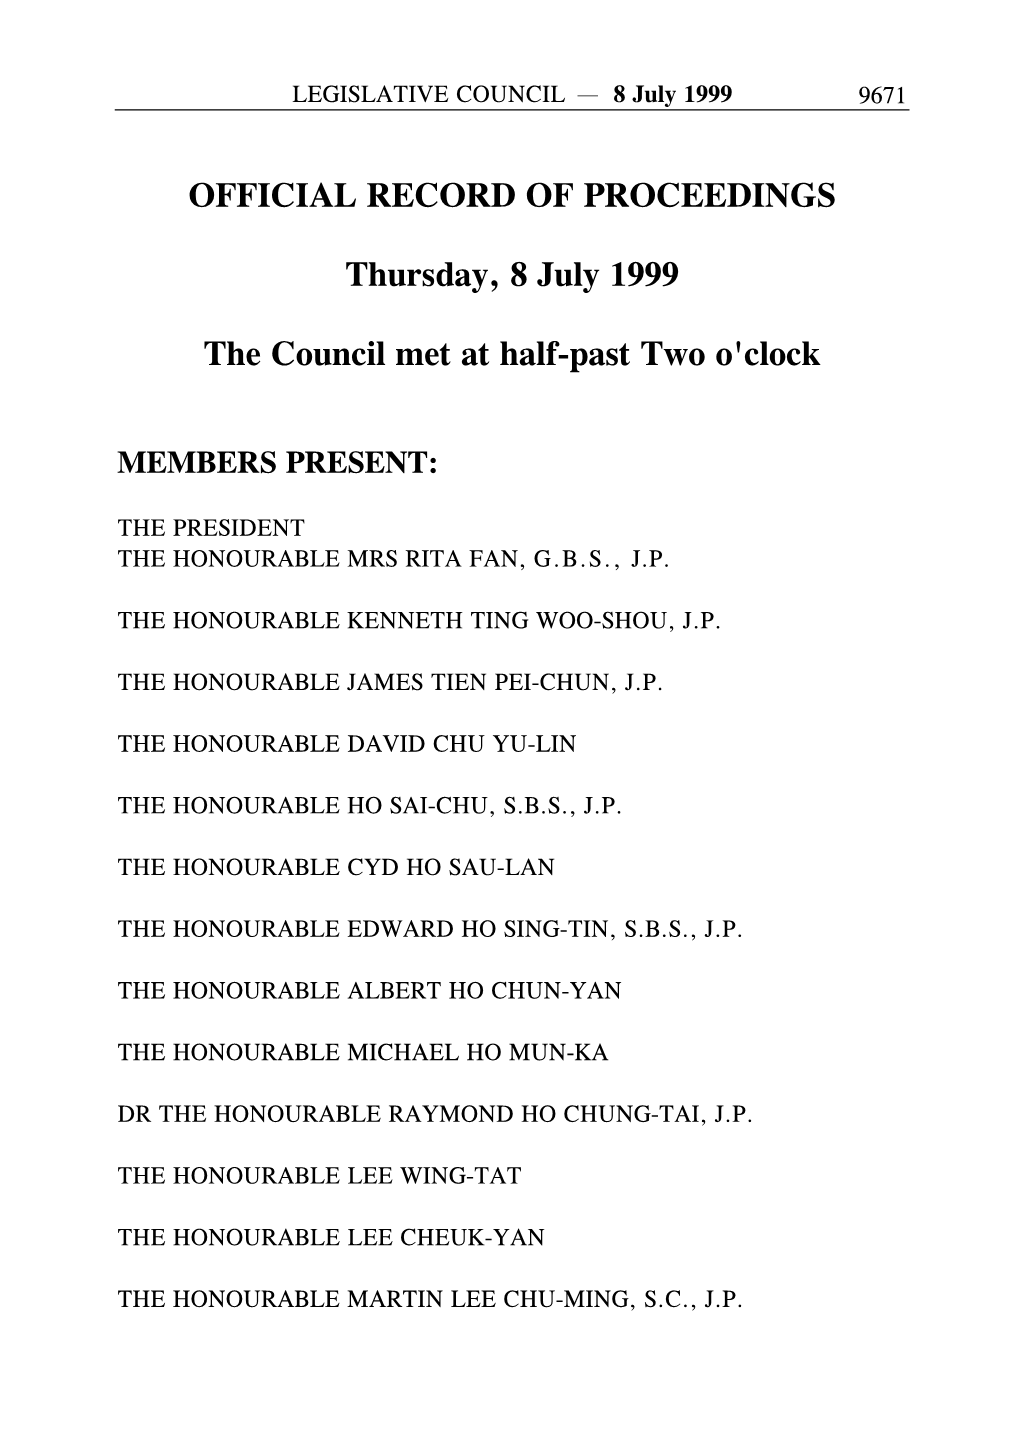 OFFICIAL RECORD of PROCEEDINGS Thursday, 8 July